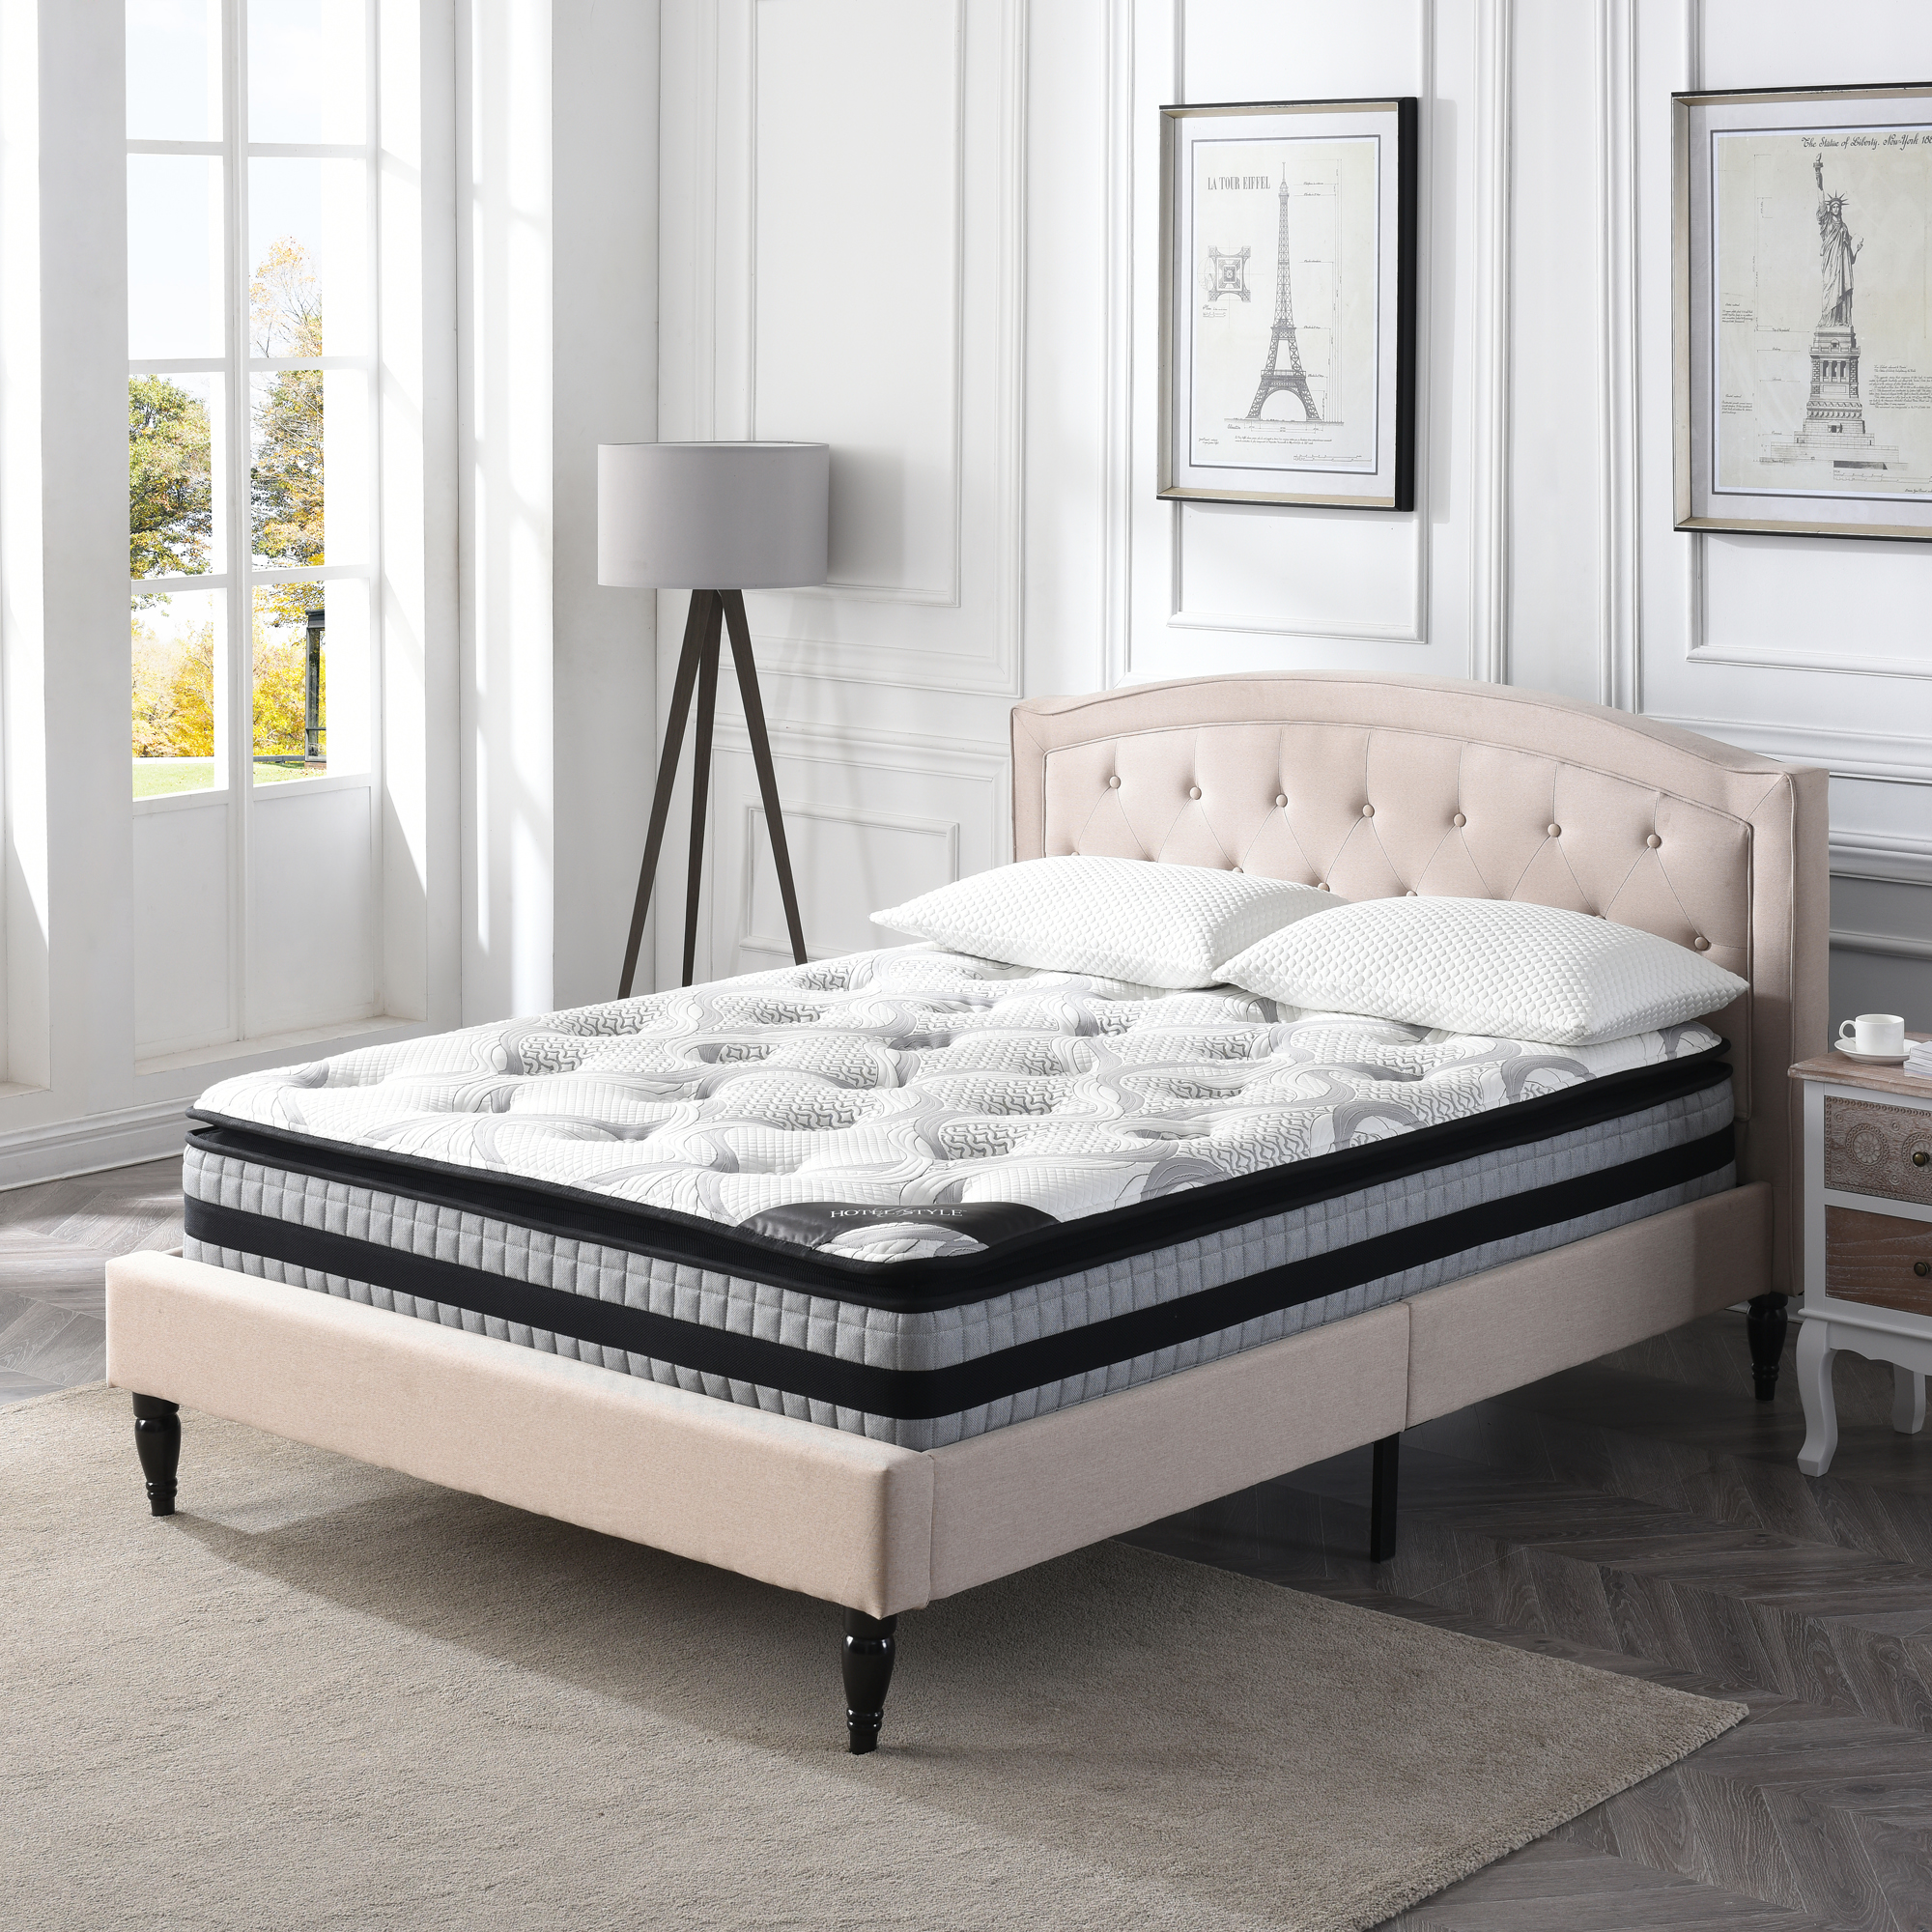 Revo12-Inch Plush Top Memory Foam and Individually Encased Spring Mattress - image 3 of 8